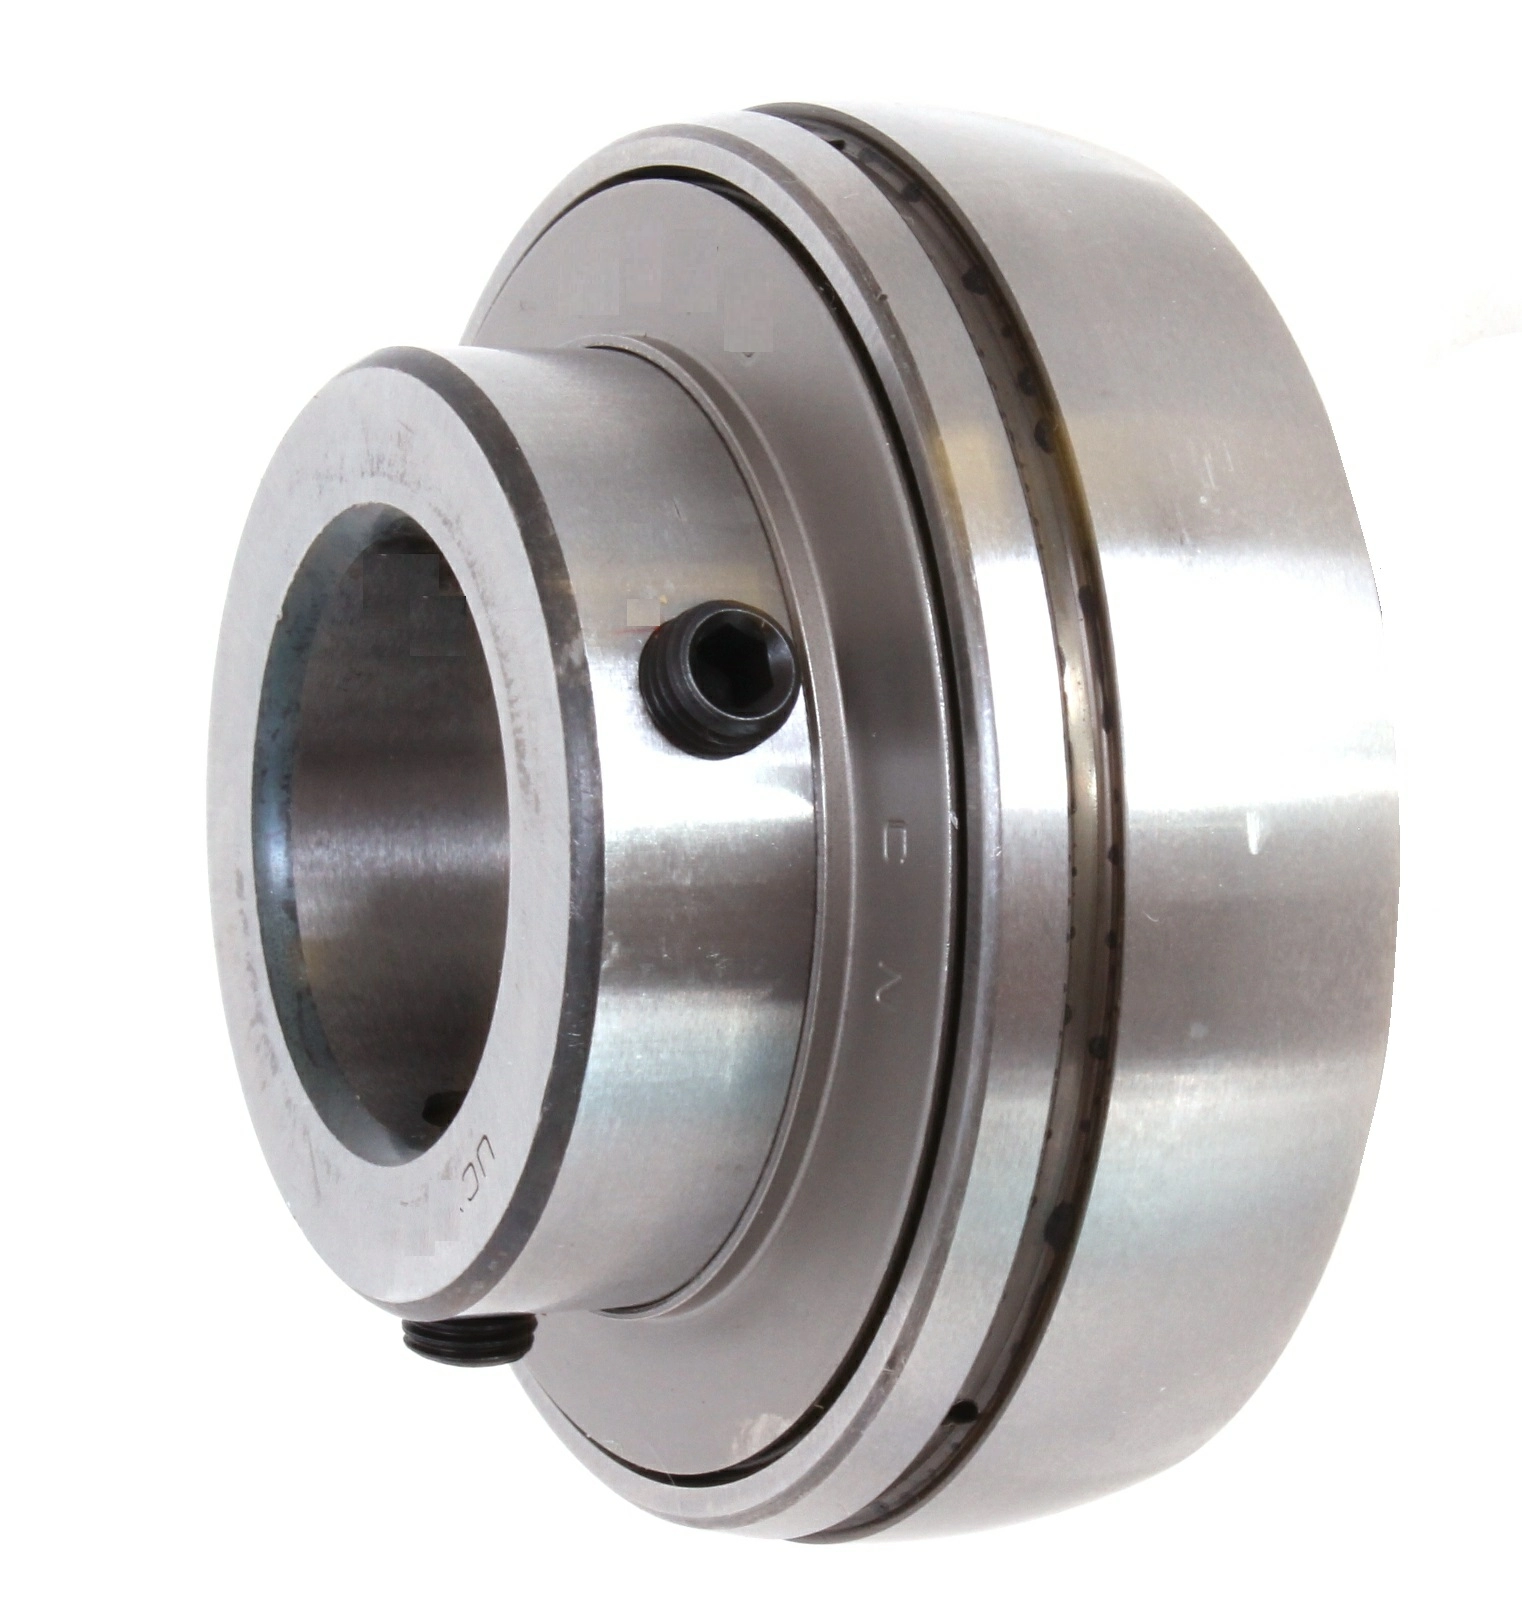 Bearing Inserts Spherical Outer 1000G, UC, UCX, T1000, Extended Inner both sides, Set Screw Lock